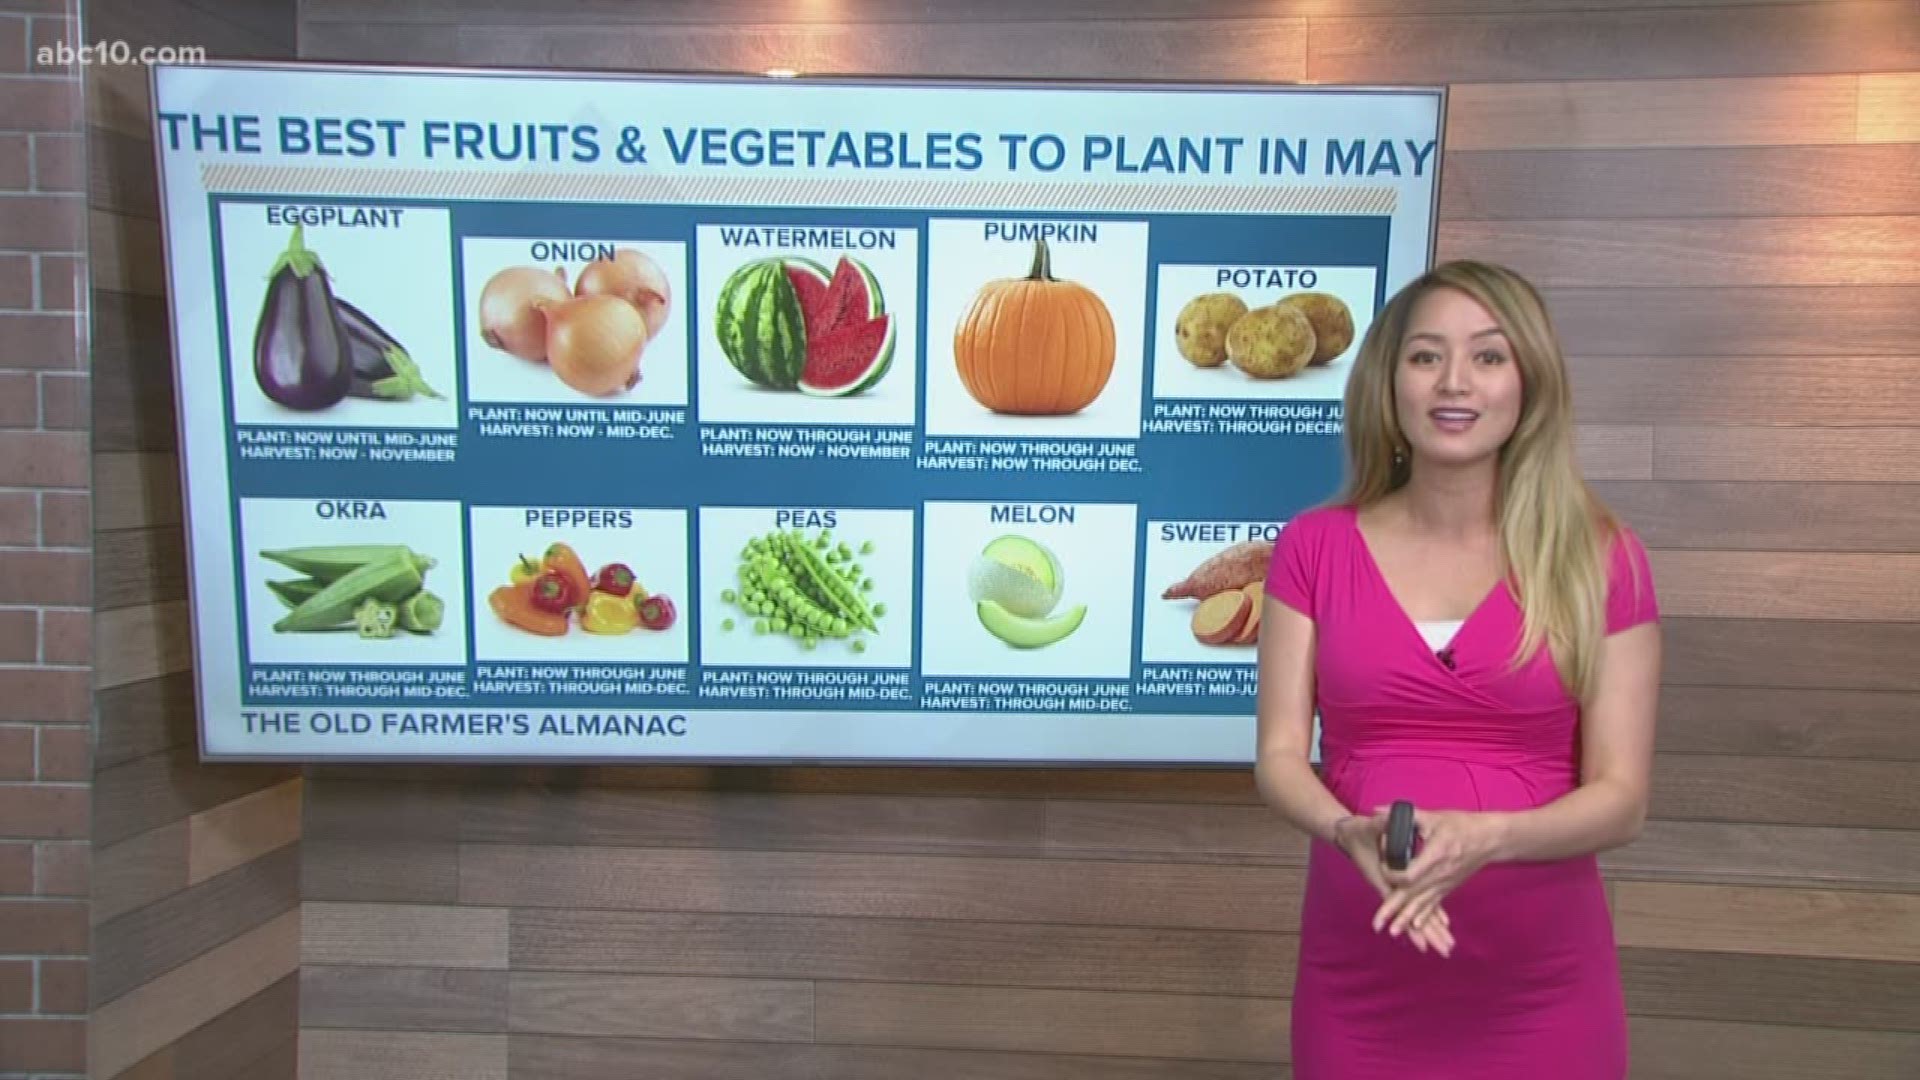 Planting season is in full swing, so Michelle Apon has put together a list of the best fruits and vegetables to grow this month and next month.